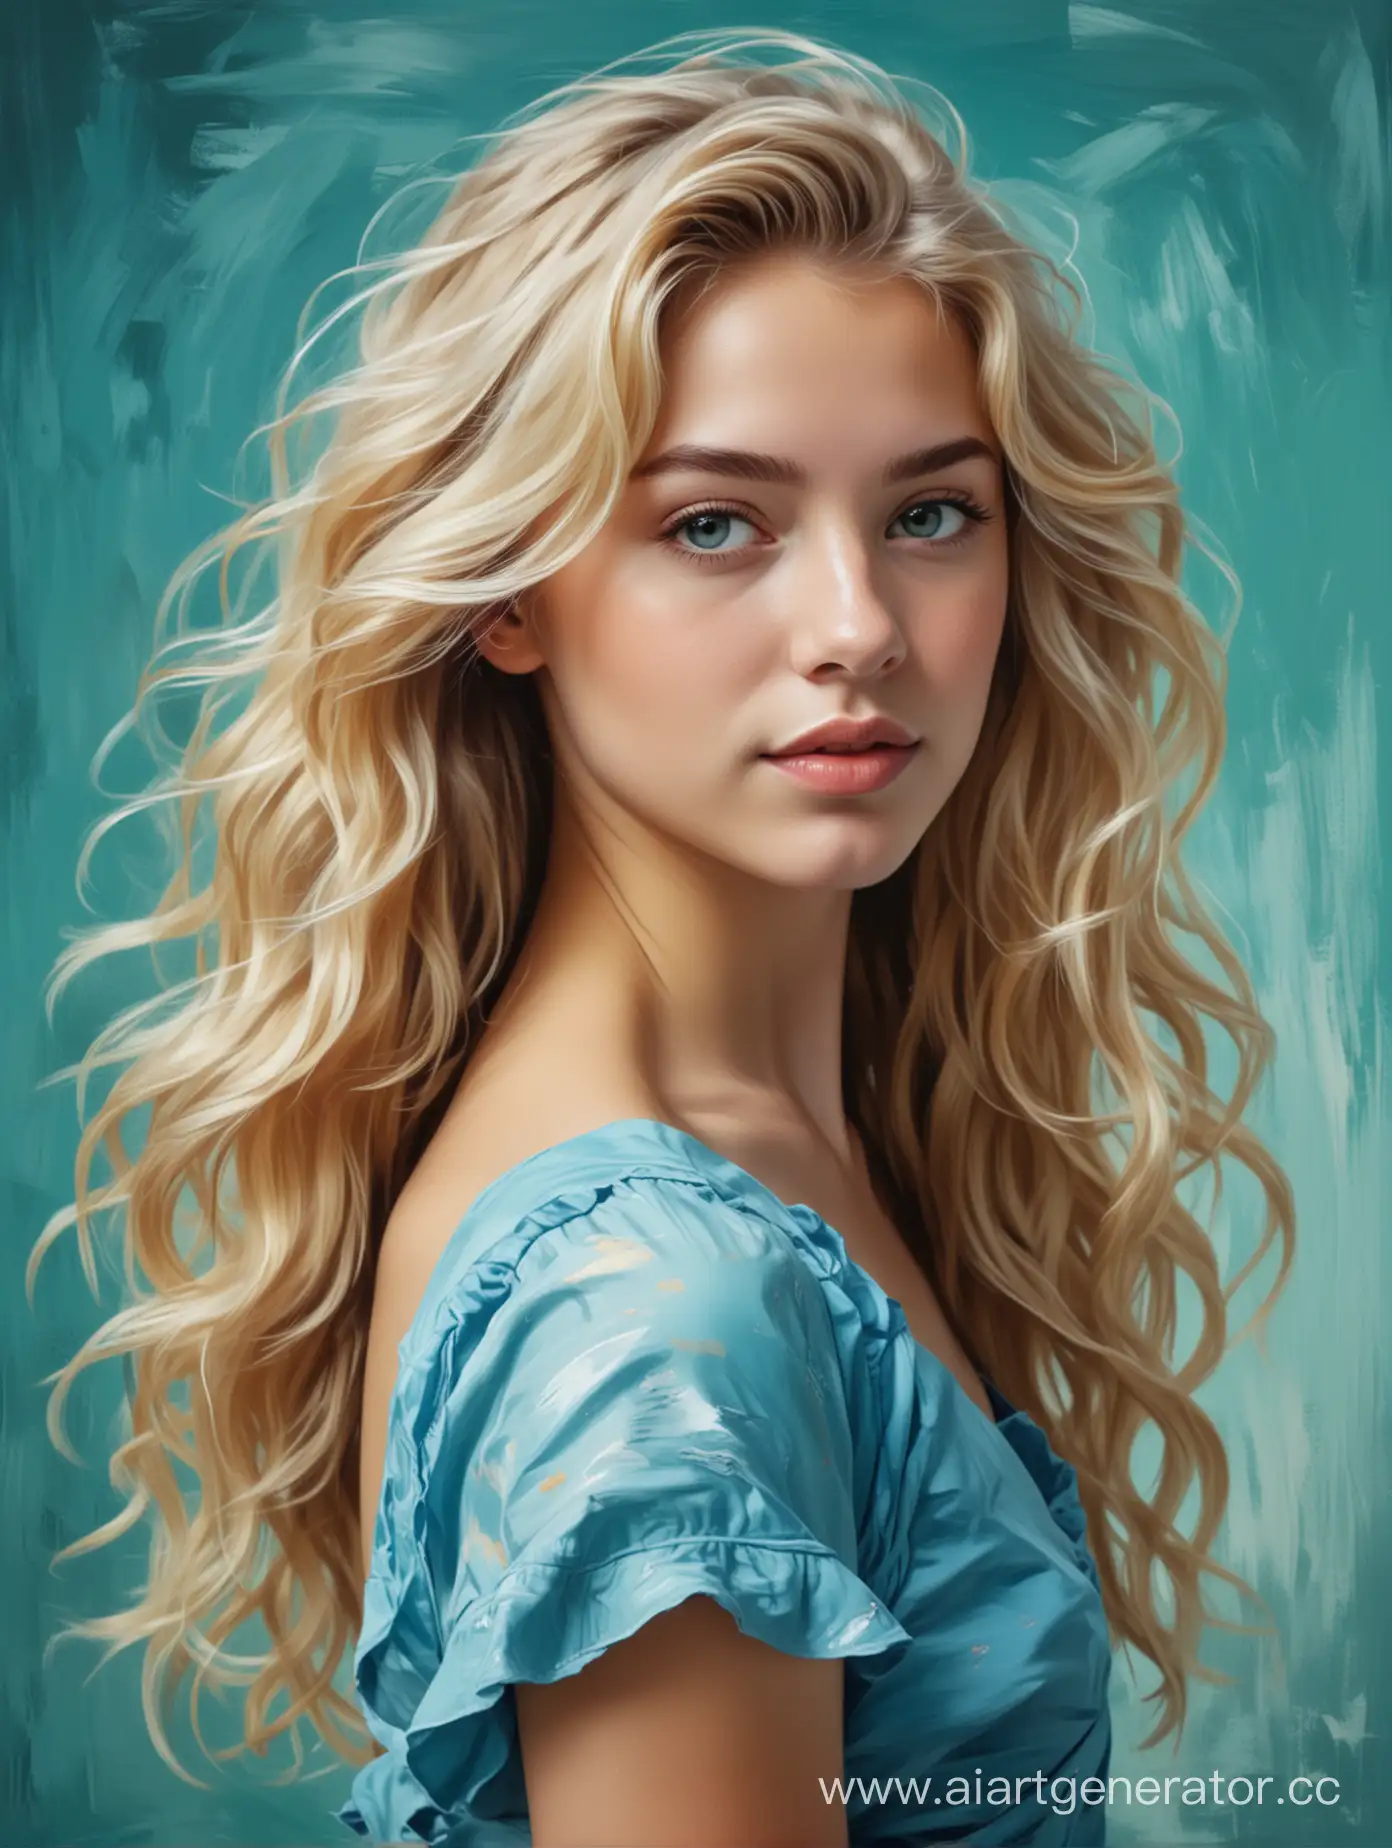 Blonde-Girl-with-Wavy-Hair-in-Blue-Dress-Amid-Turquoise-Brushstrokes